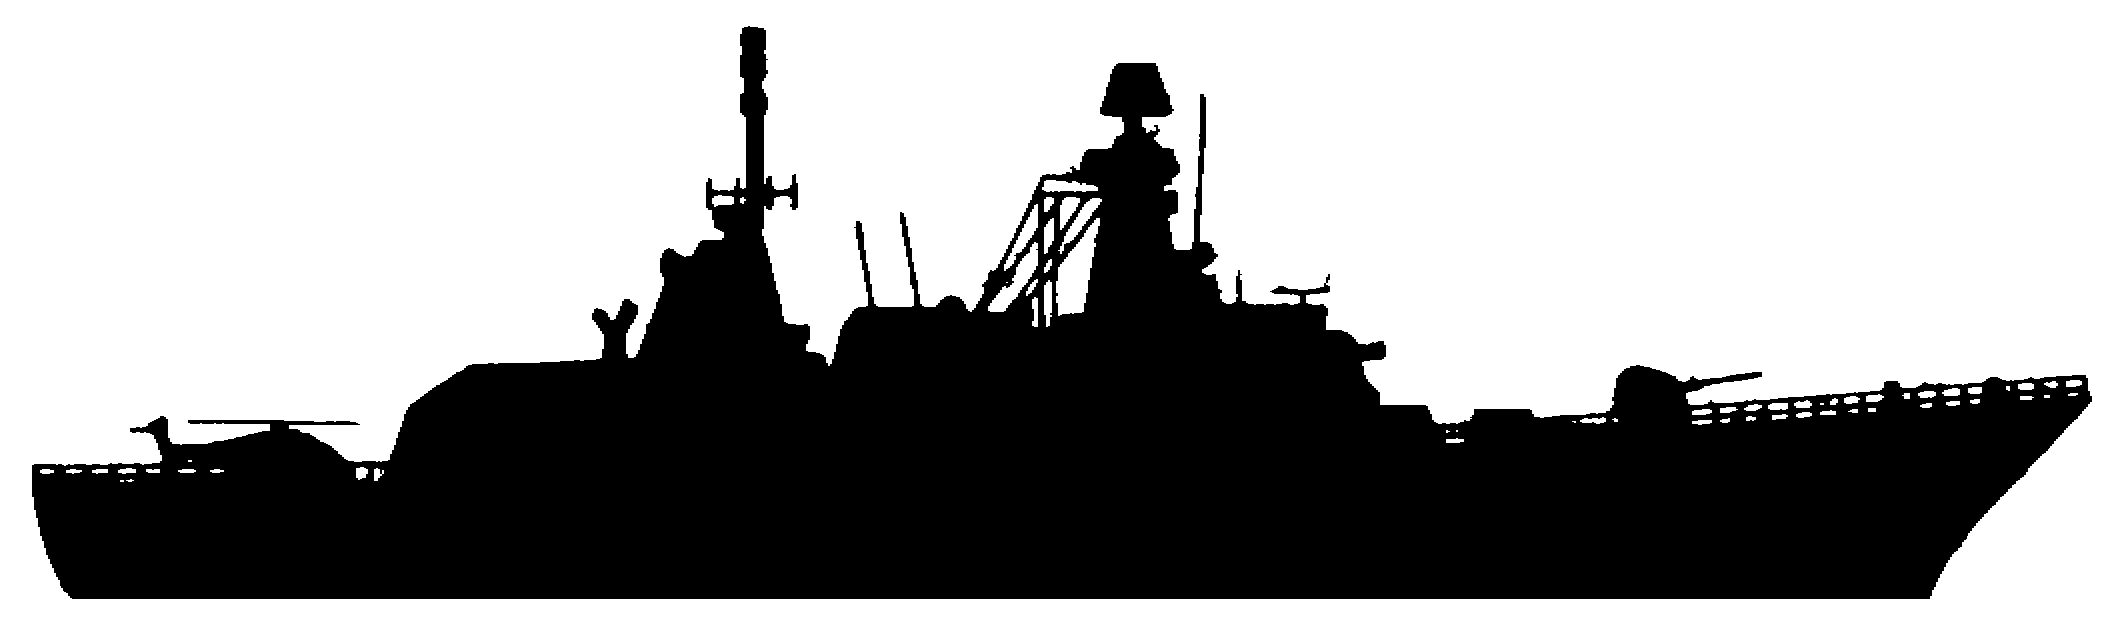 Navy Ship Silhouette Clip Art at GetDrawings | Free download